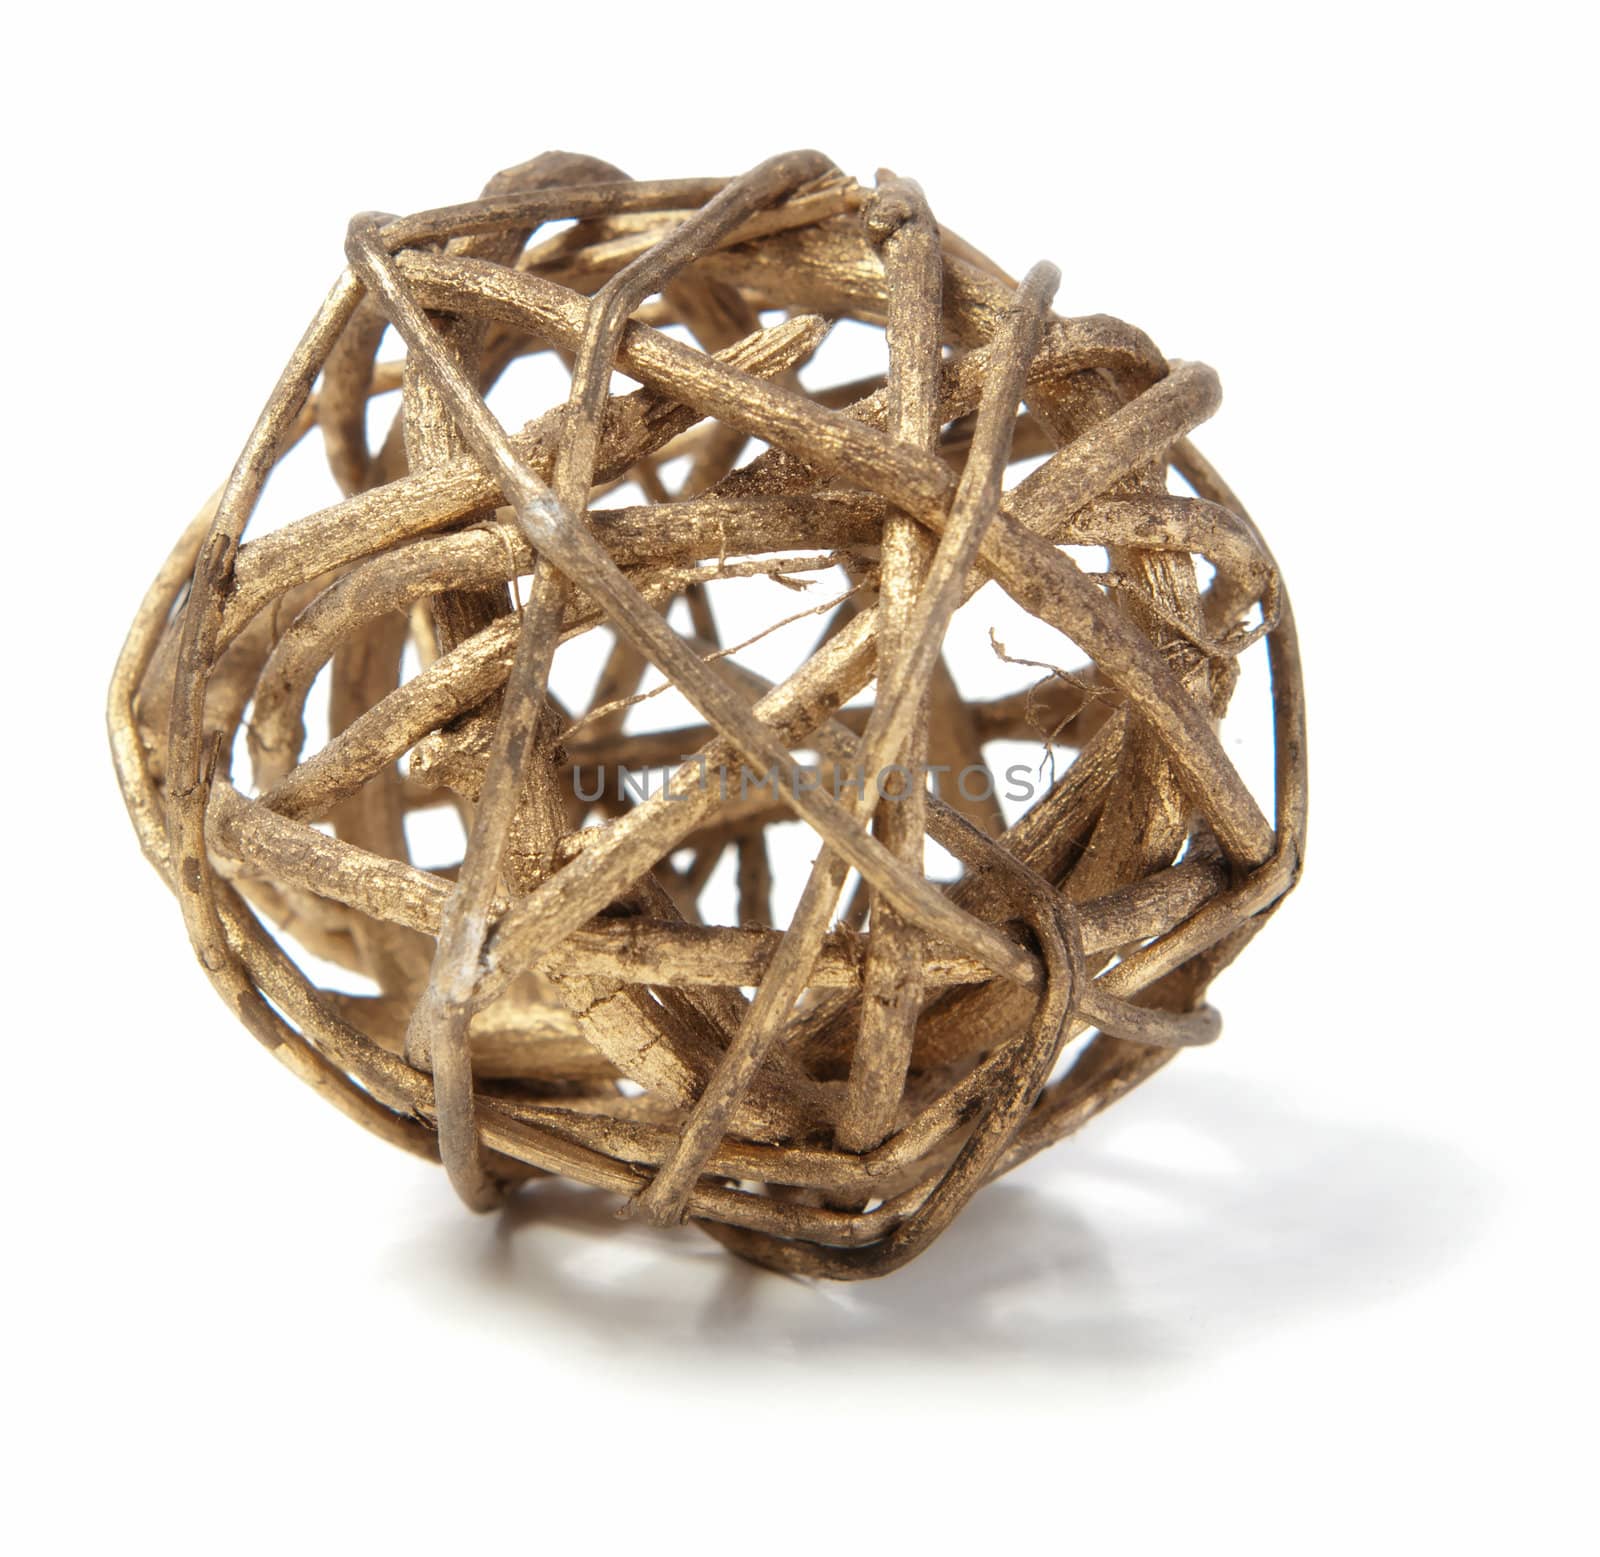 A decorative wicker wooden ball isolated against a white background.